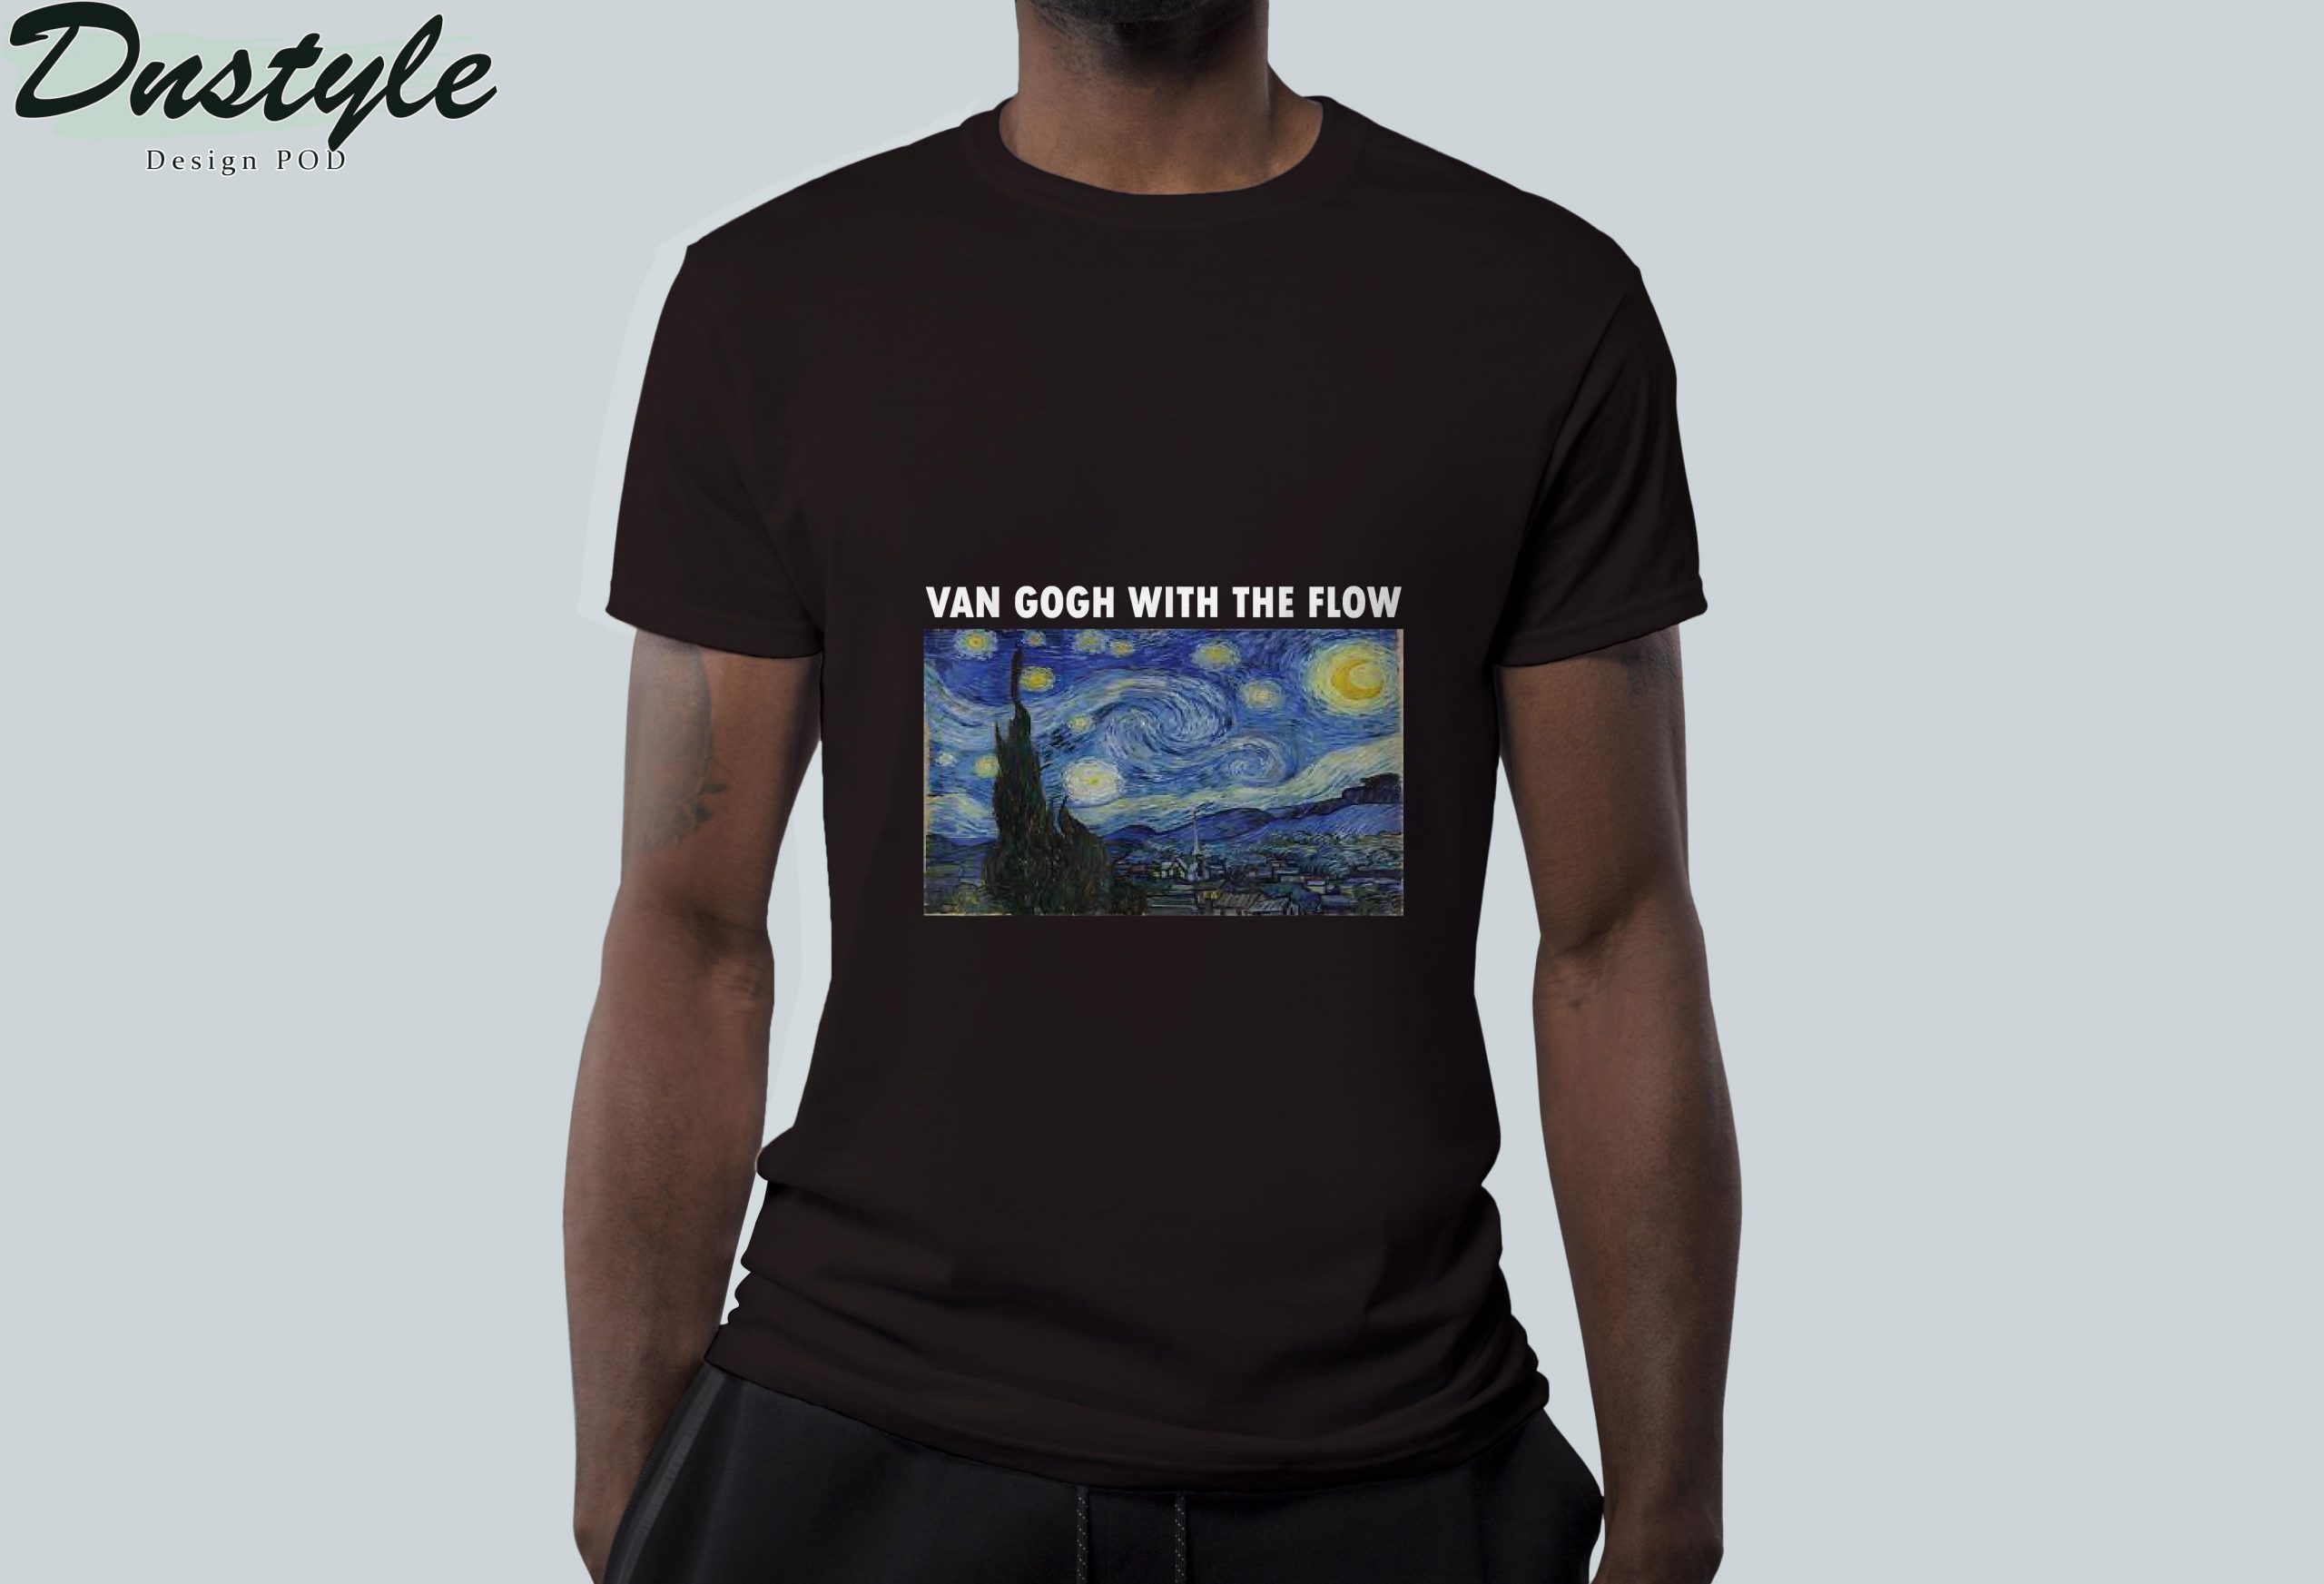 Van gogh with the flow t-shirt 2